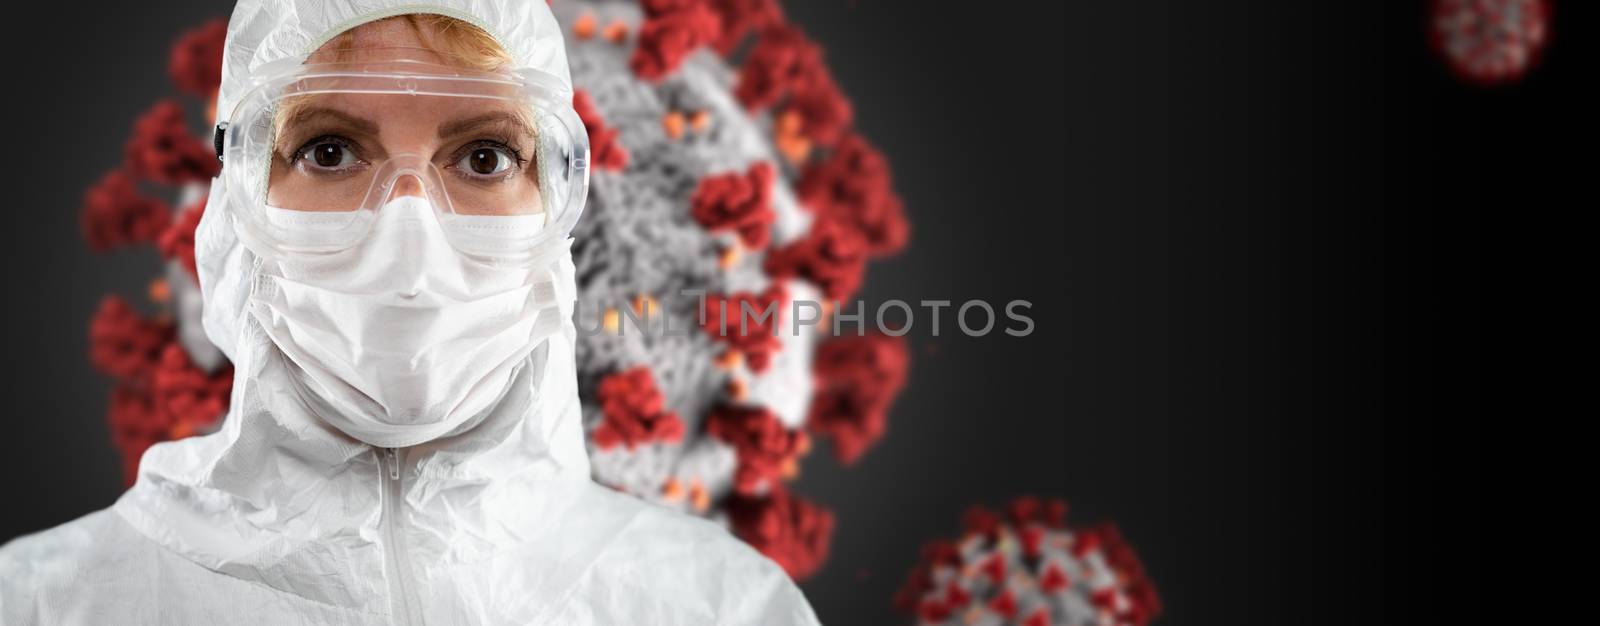 Banner of Female Doctor or Nurse In Medical Face Mask and Protective Gear With Coronavirus Behind. by Feverpitched